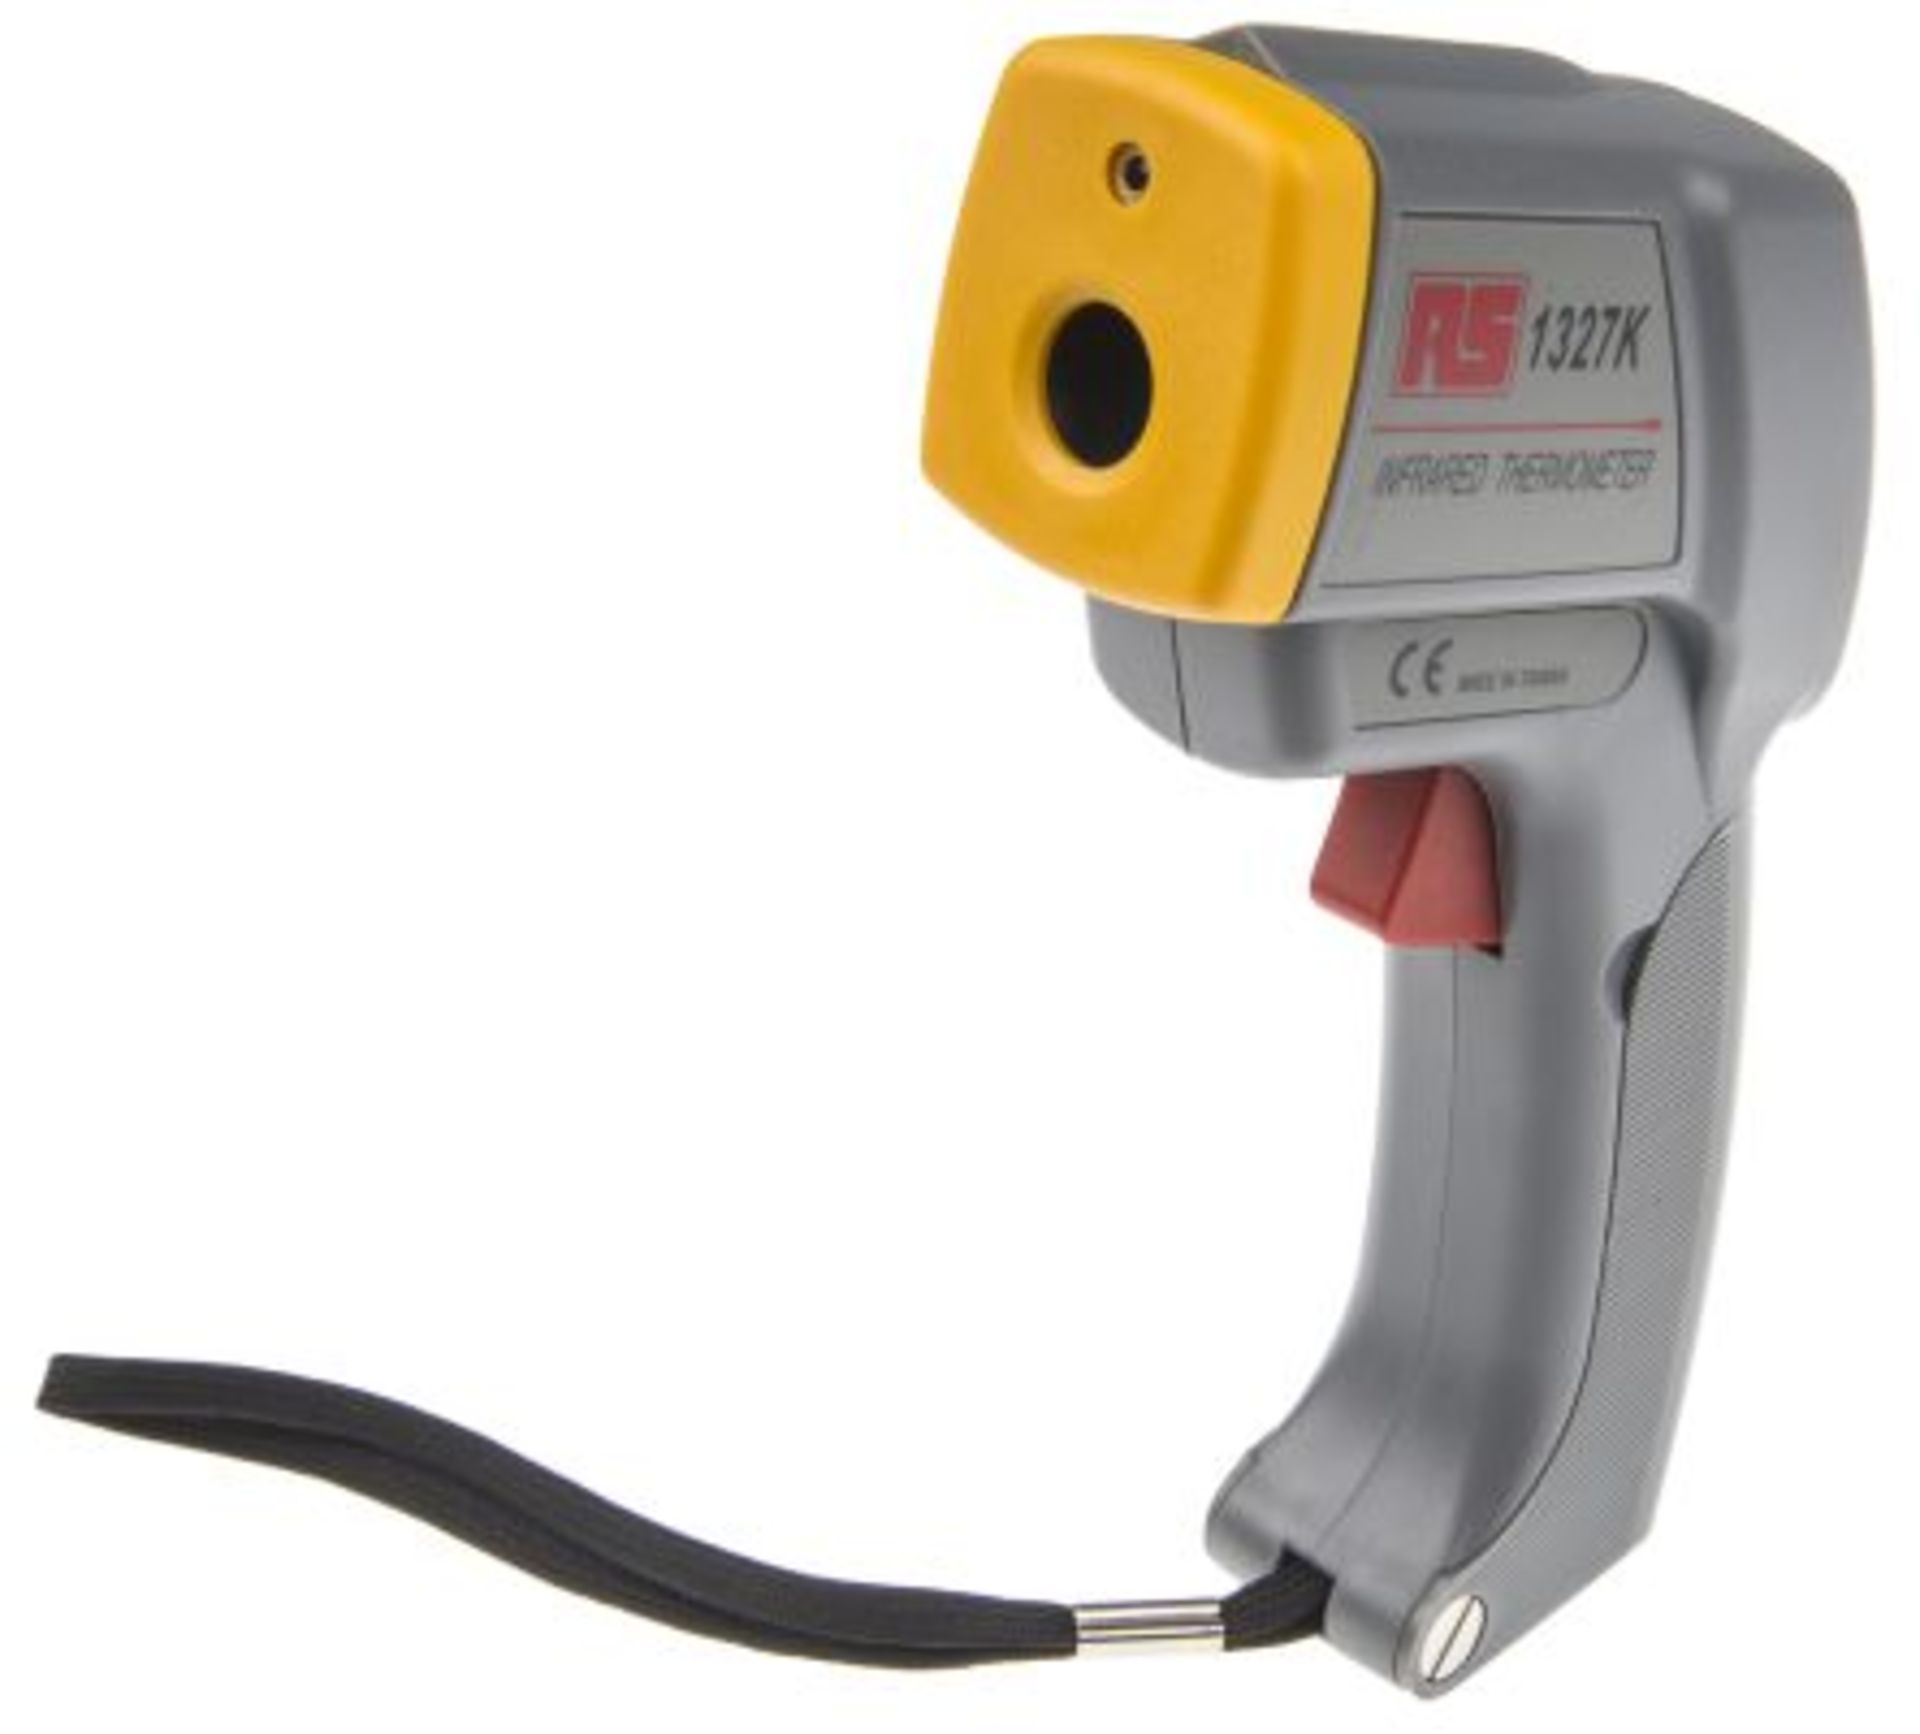 RS-1327K Infrared Thermometer with socket for Type K thermocouple - Image 2 of 3